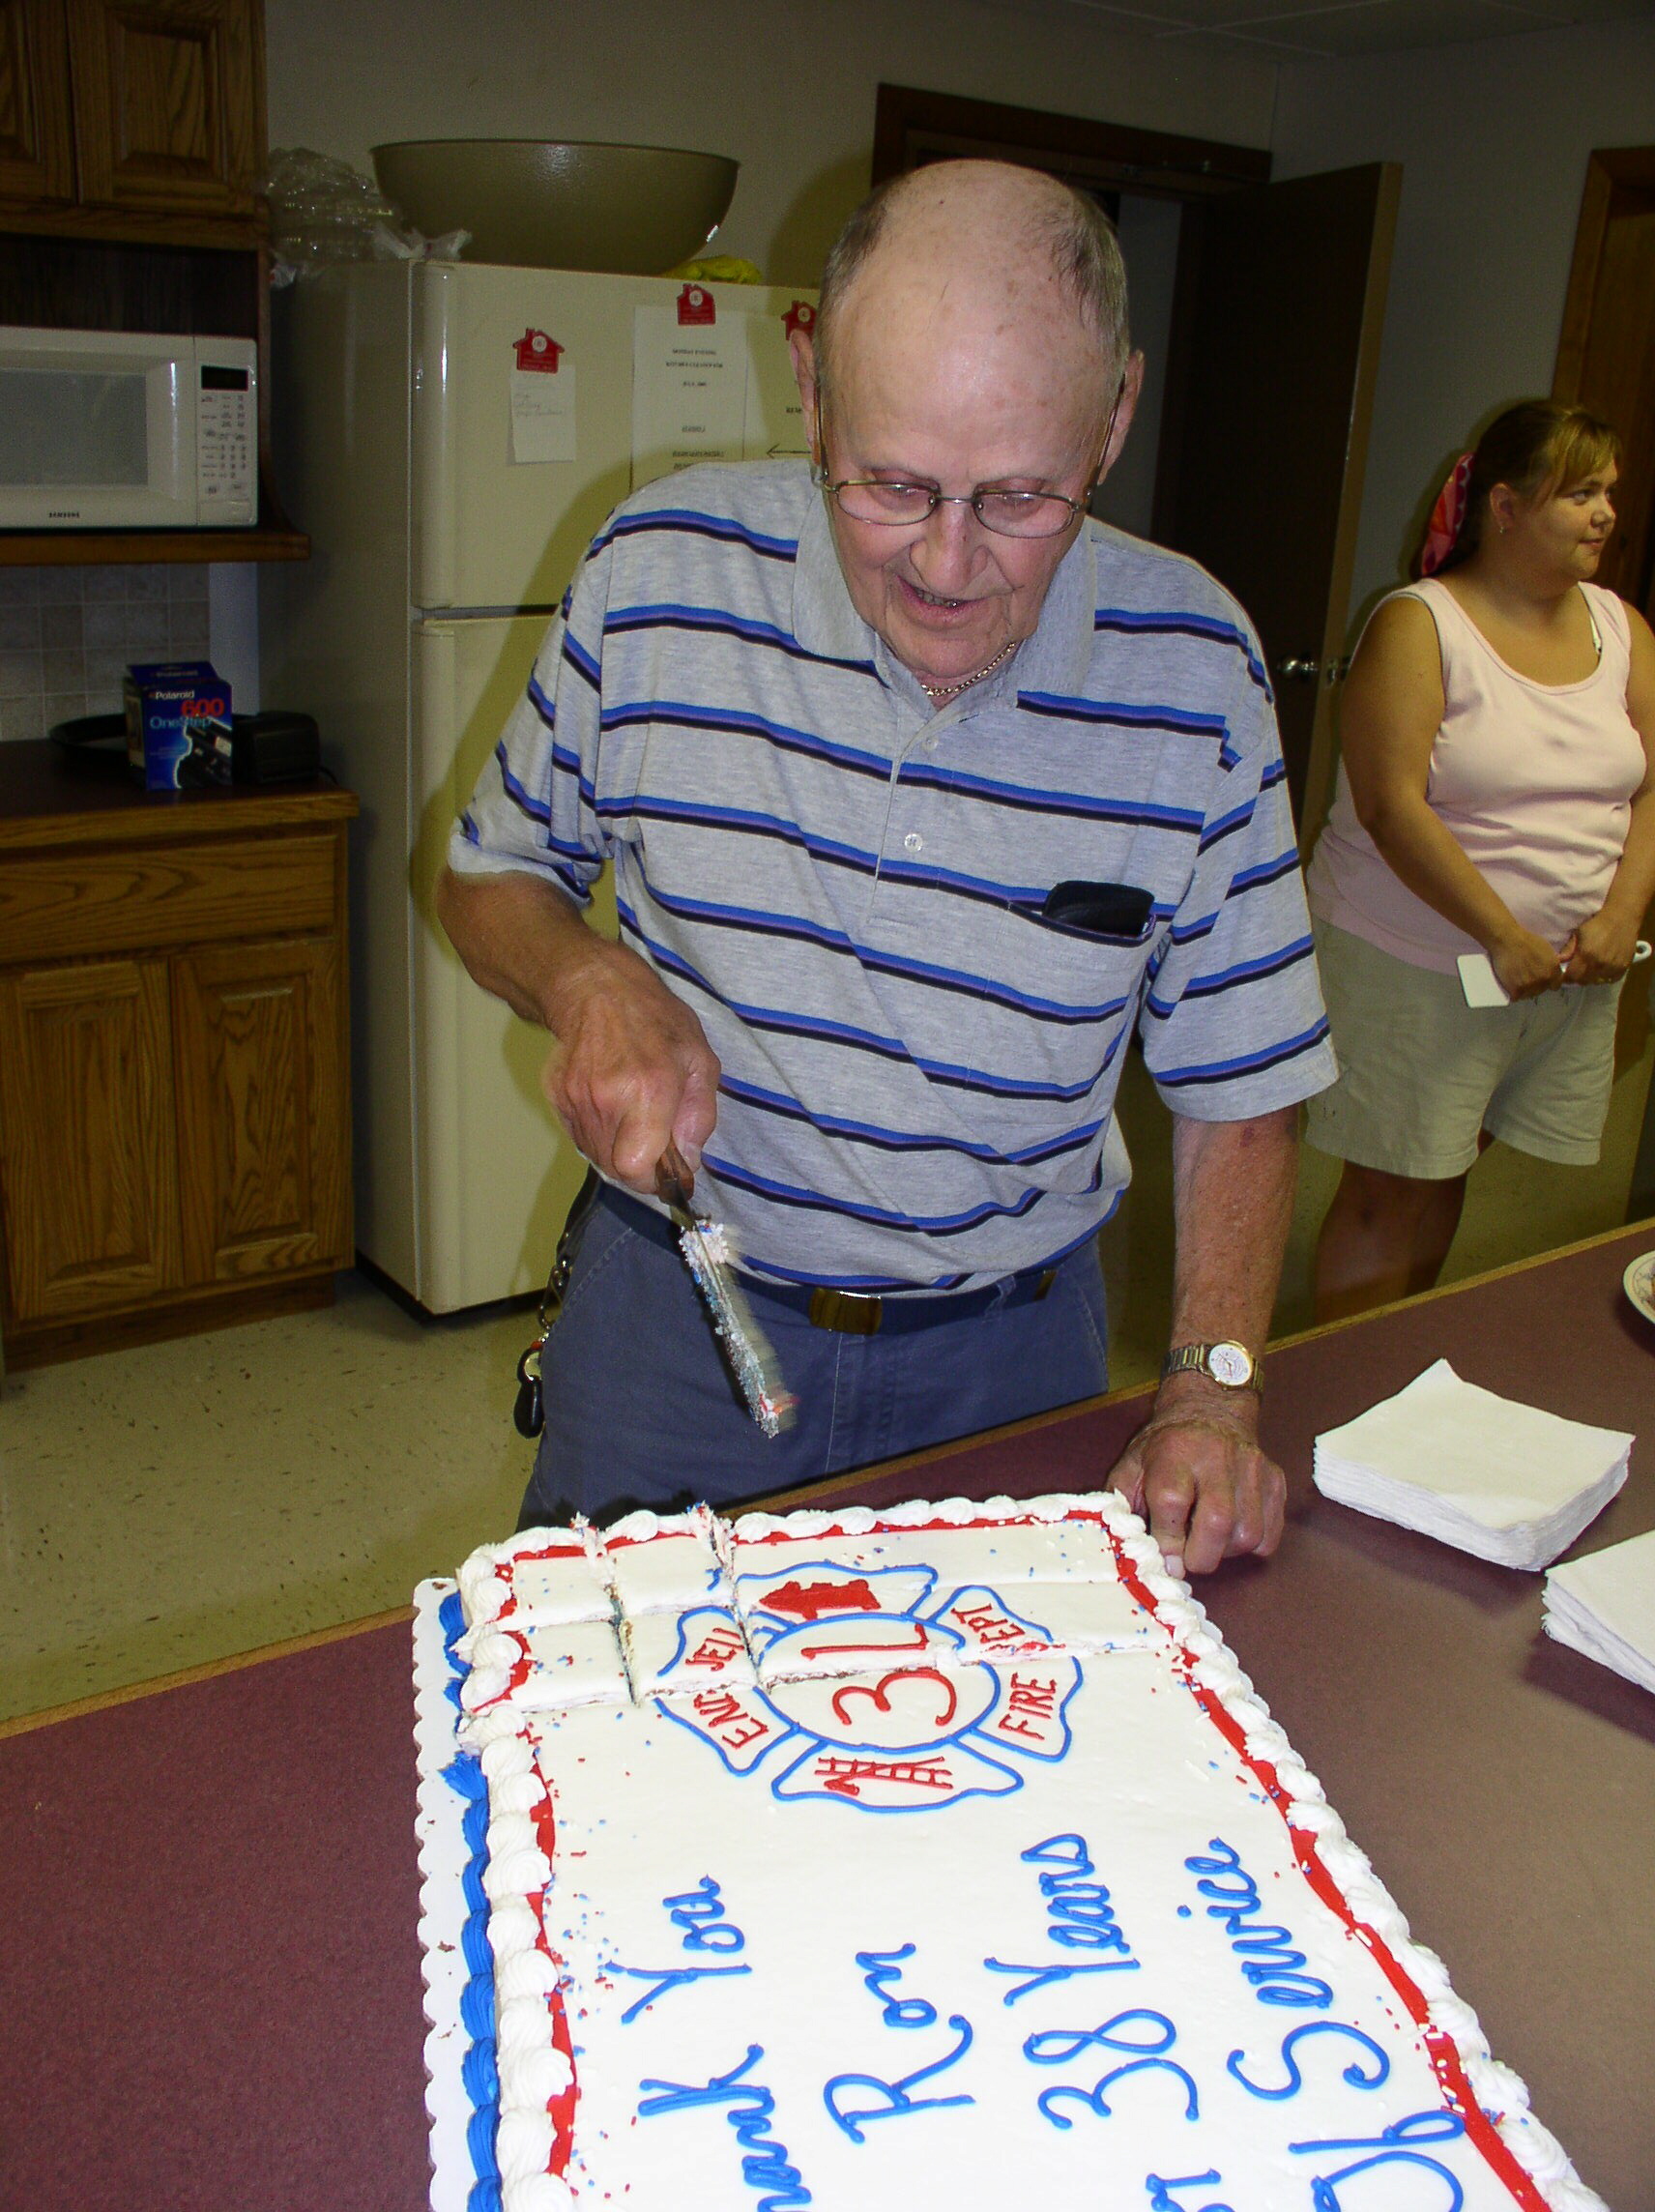 07-30-05  Other - Ron Retires